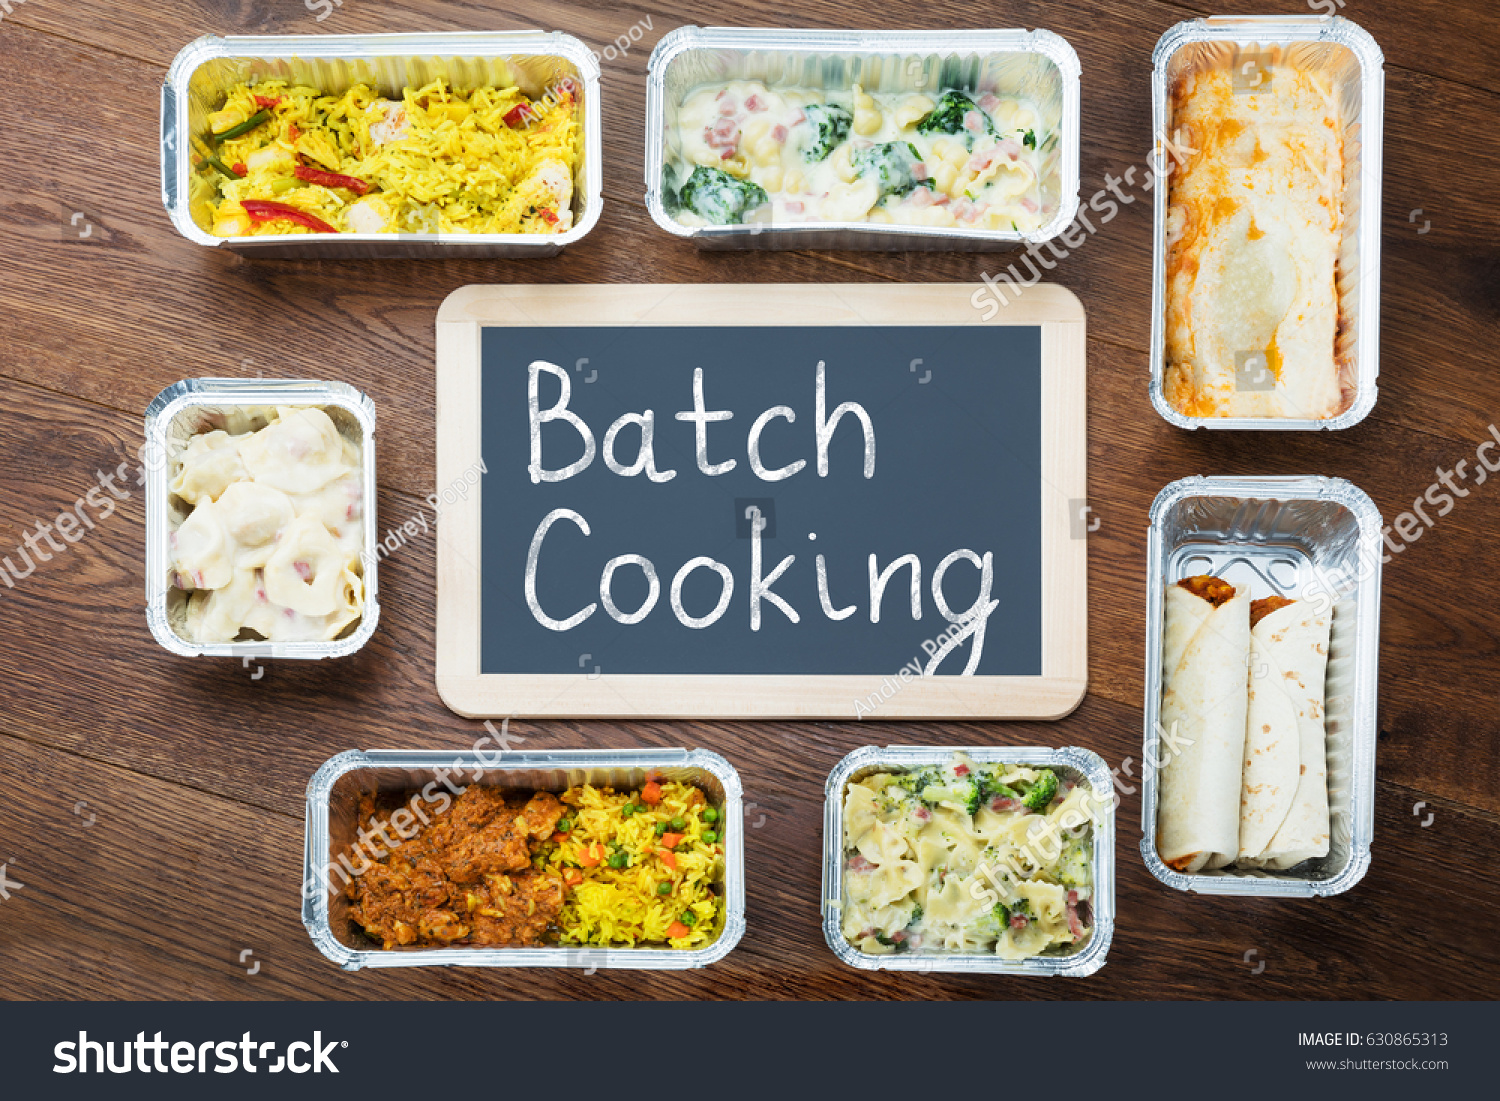 Batch Cooking Text Written On Slate With Take Away Dishes In Foil Container On Table #630865313